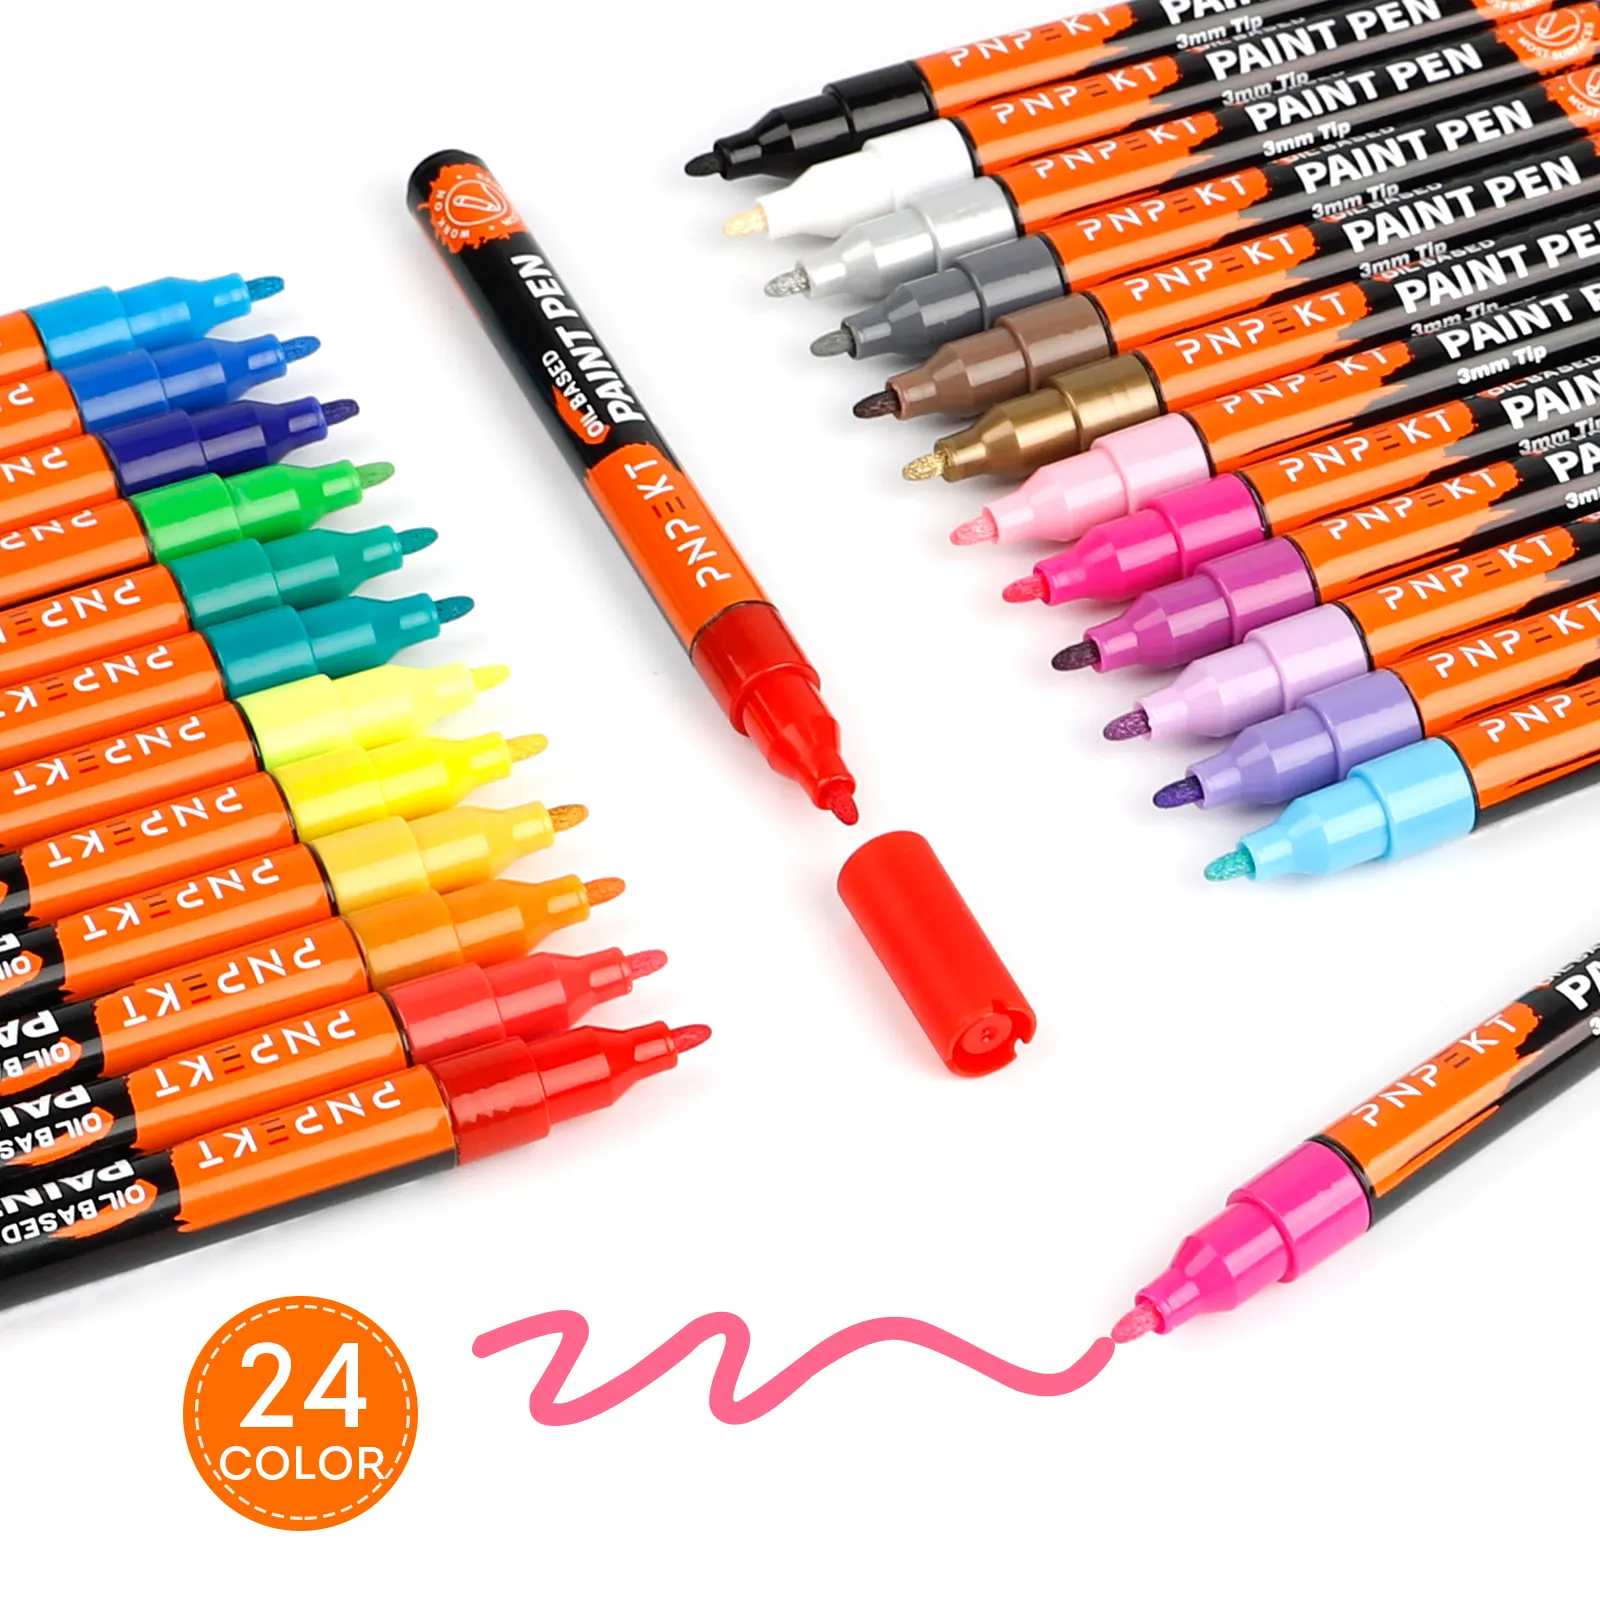 High Reputation Customizable 3mm Thick Tip 24 Color Refillable Oil Based Art Paint Markers Pen